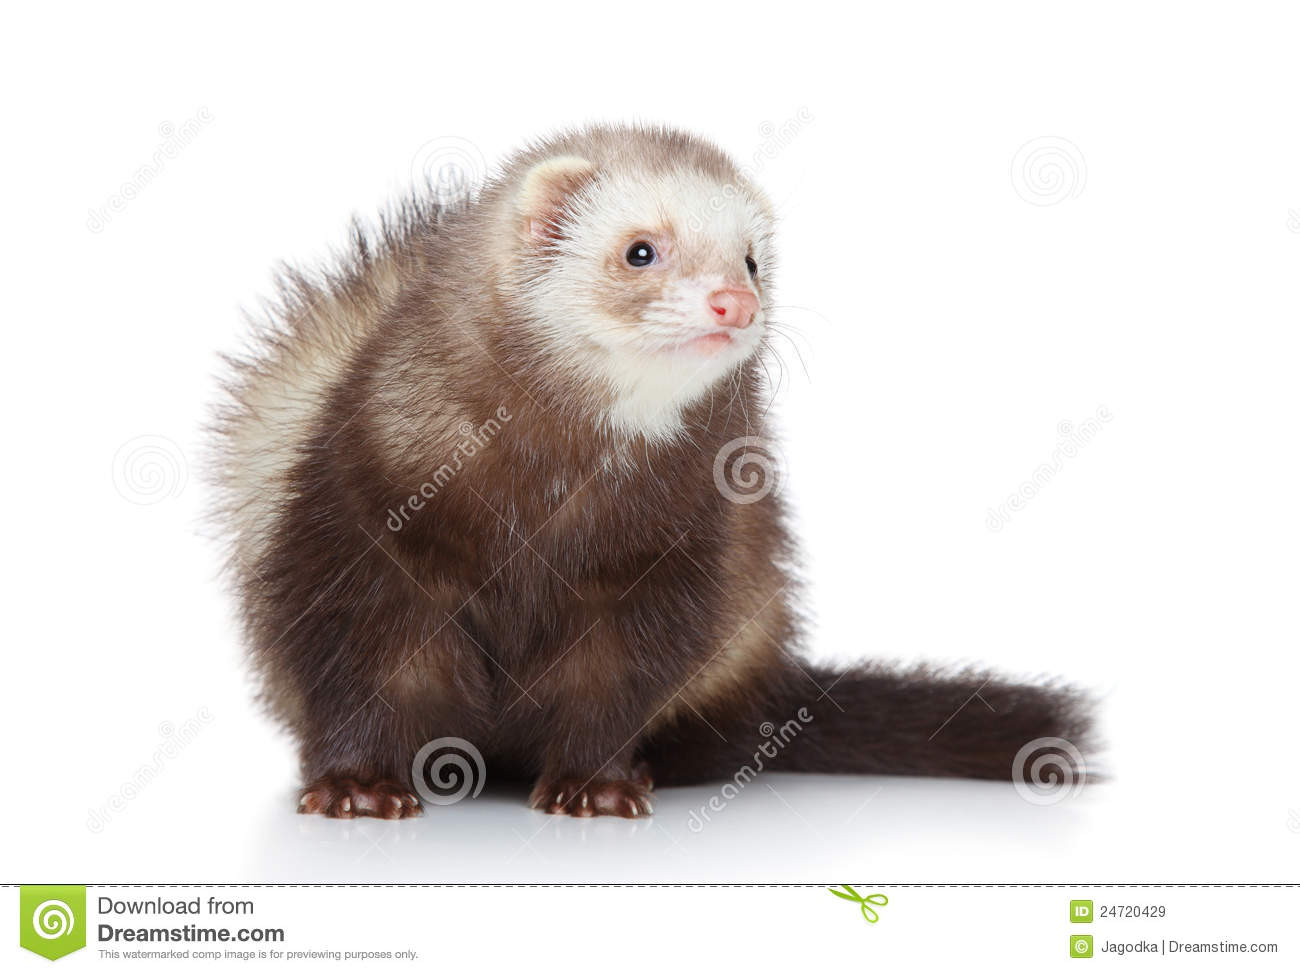 Ferret Posing On A White Background Royalty Free Stock Images   Image    